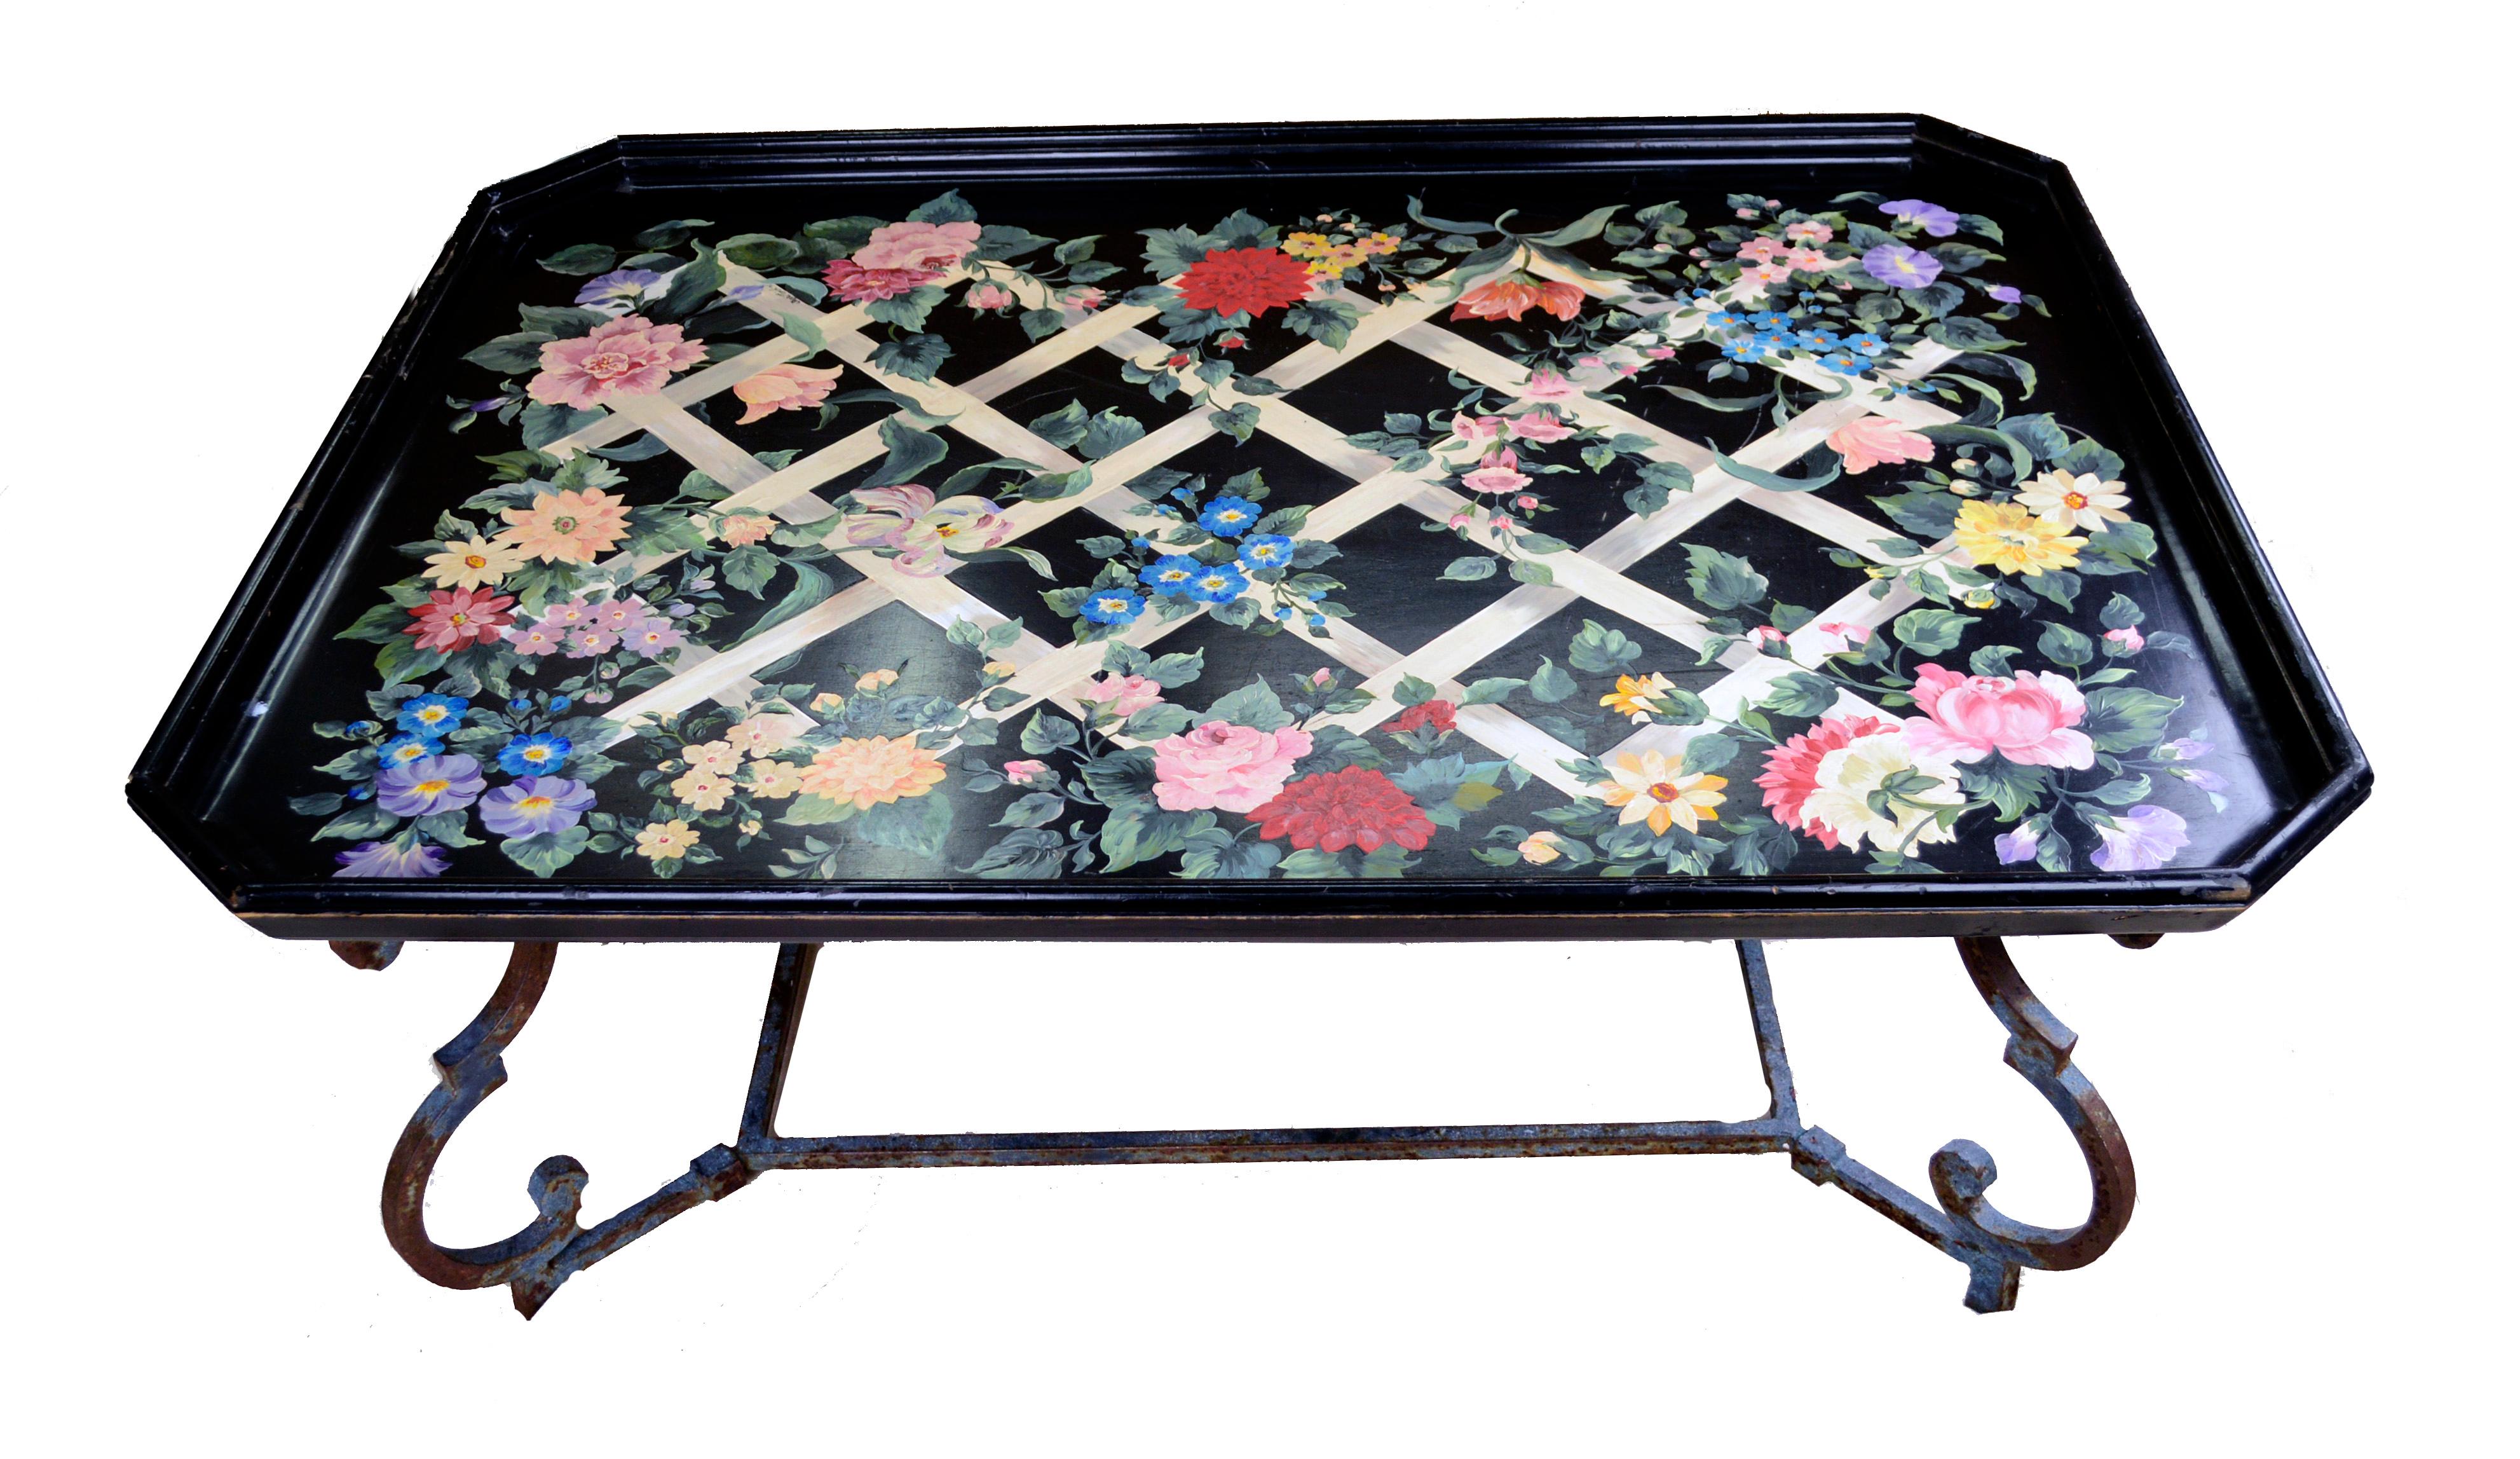 Renaissance Tole Painting Lattice Work design Large Tray Table Painted by Shari Tipich For Sale